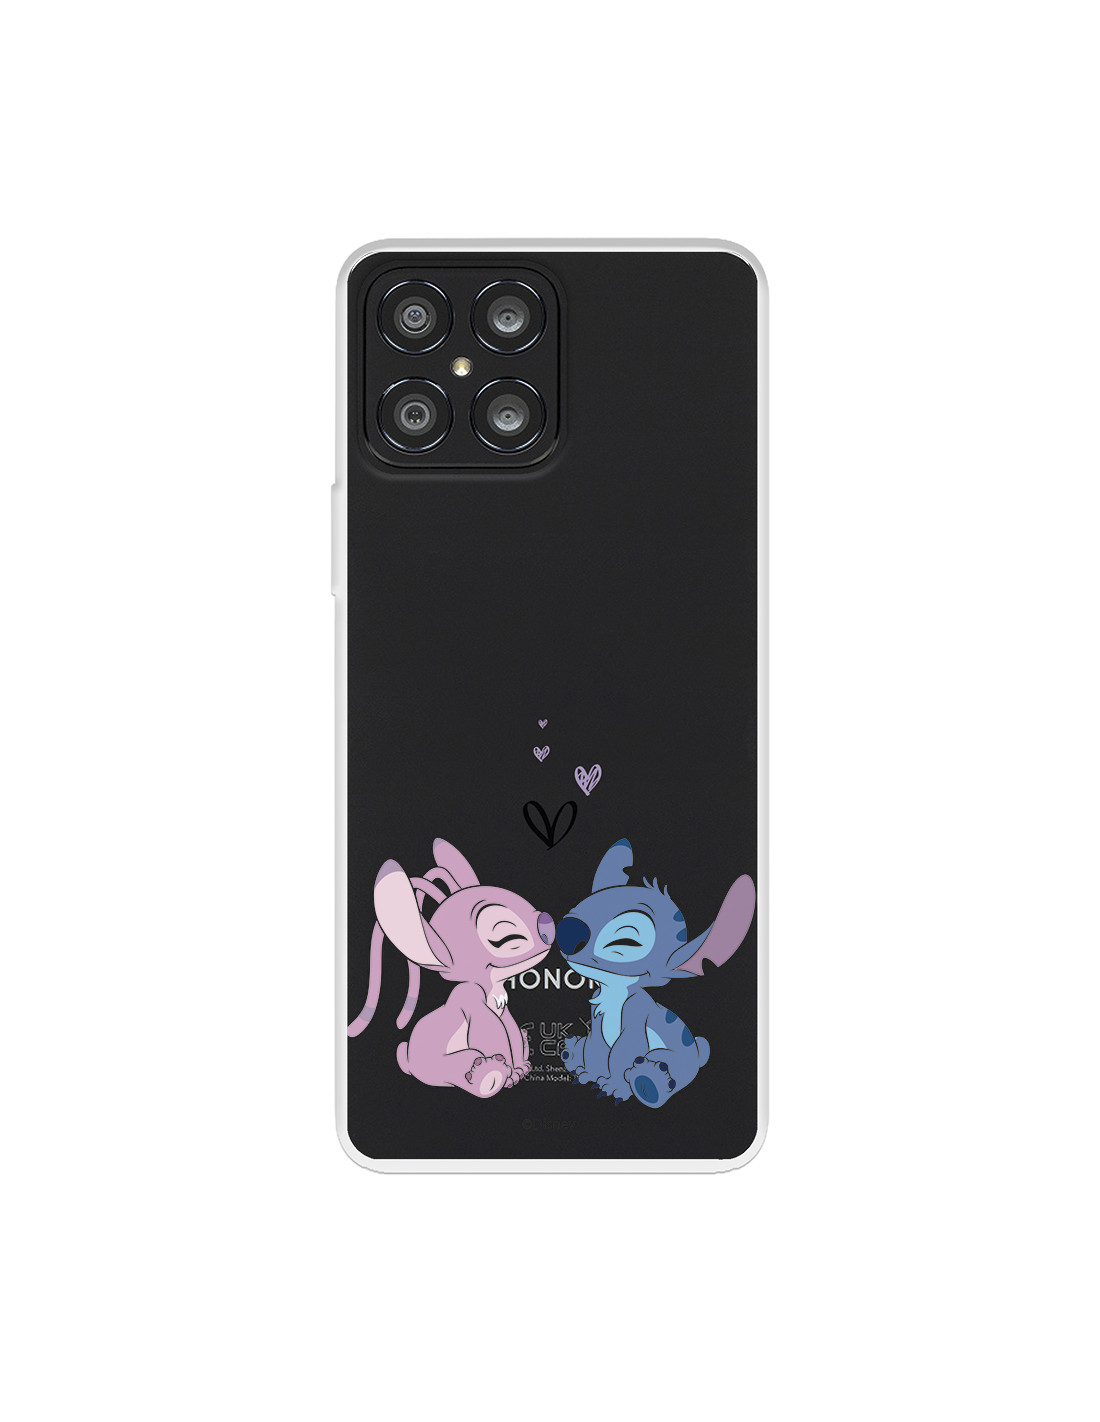 Stitch Phone Case Honor X6, Honorx8 Mobile Phone Case